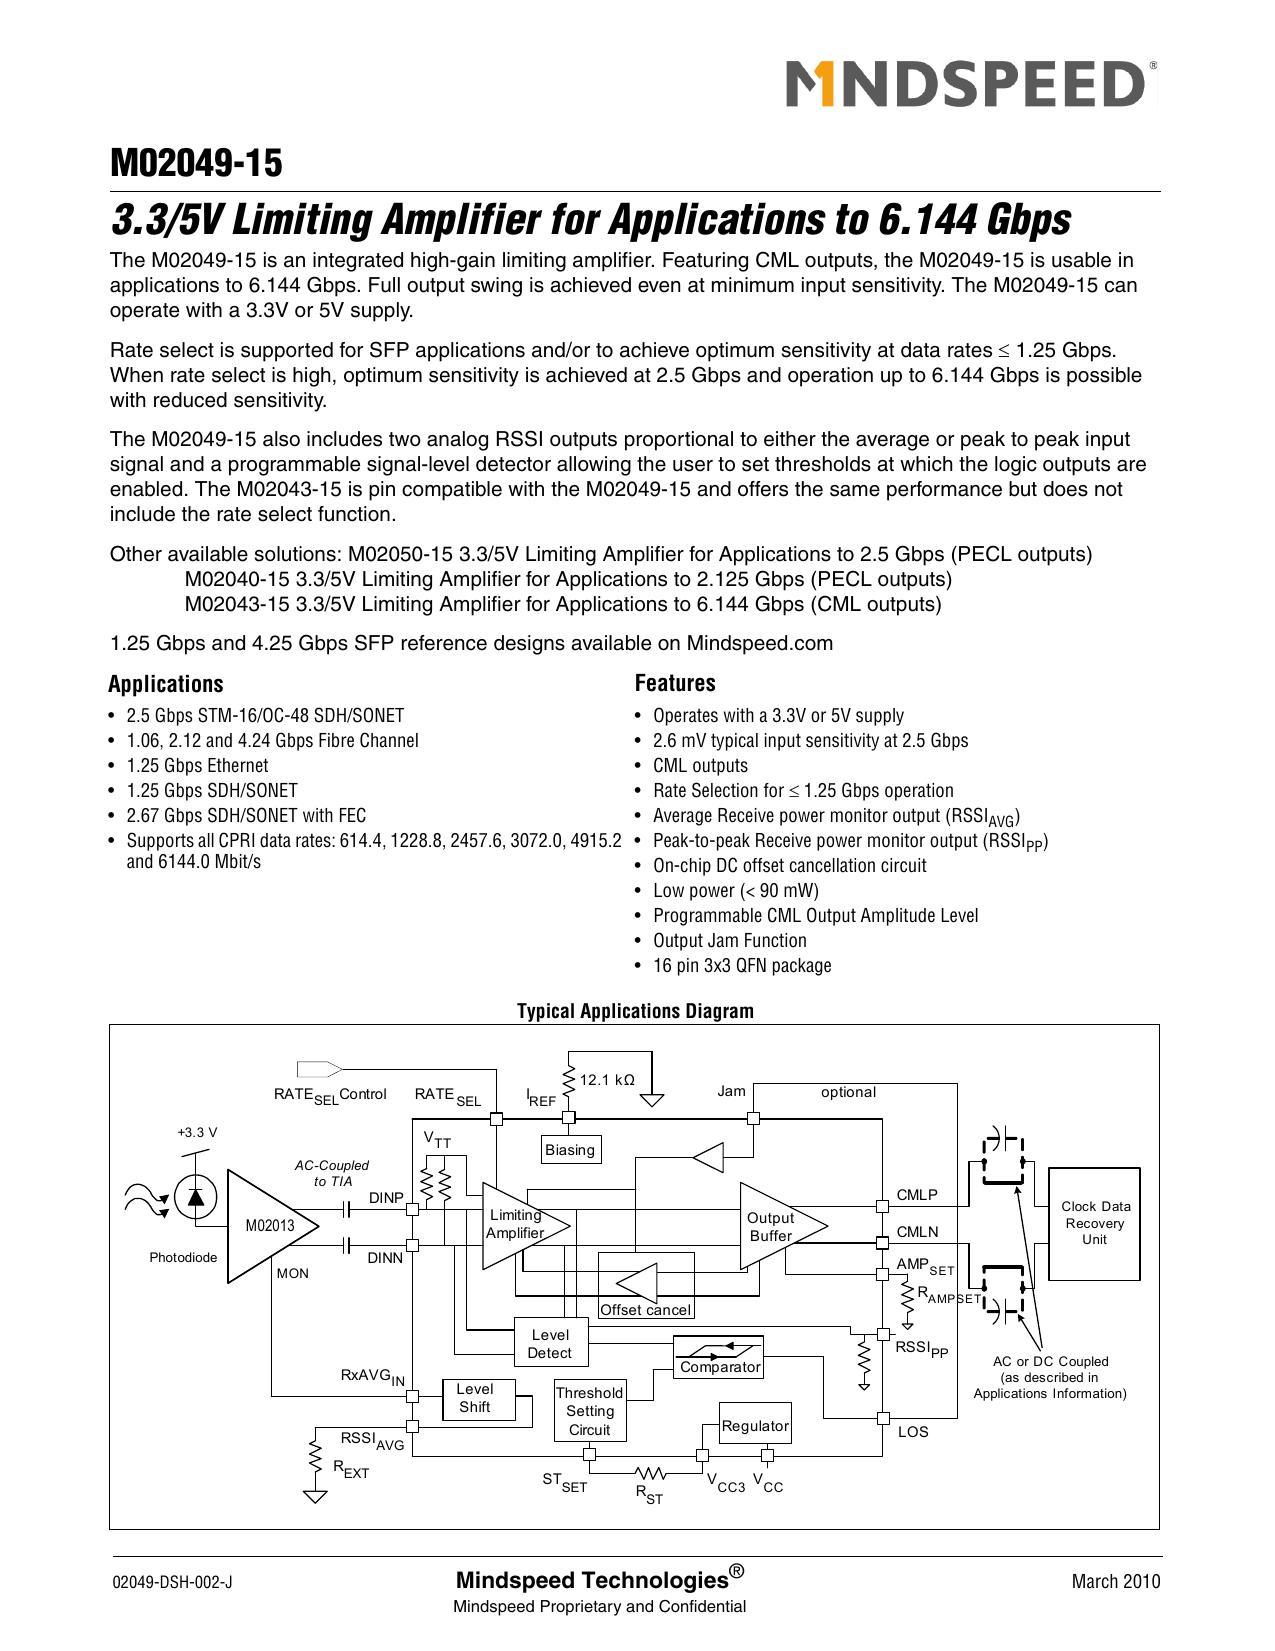 mndspeed-mo2049-15-335v-limiting-amplifier-for-applications-to-6144-gbps.pdf